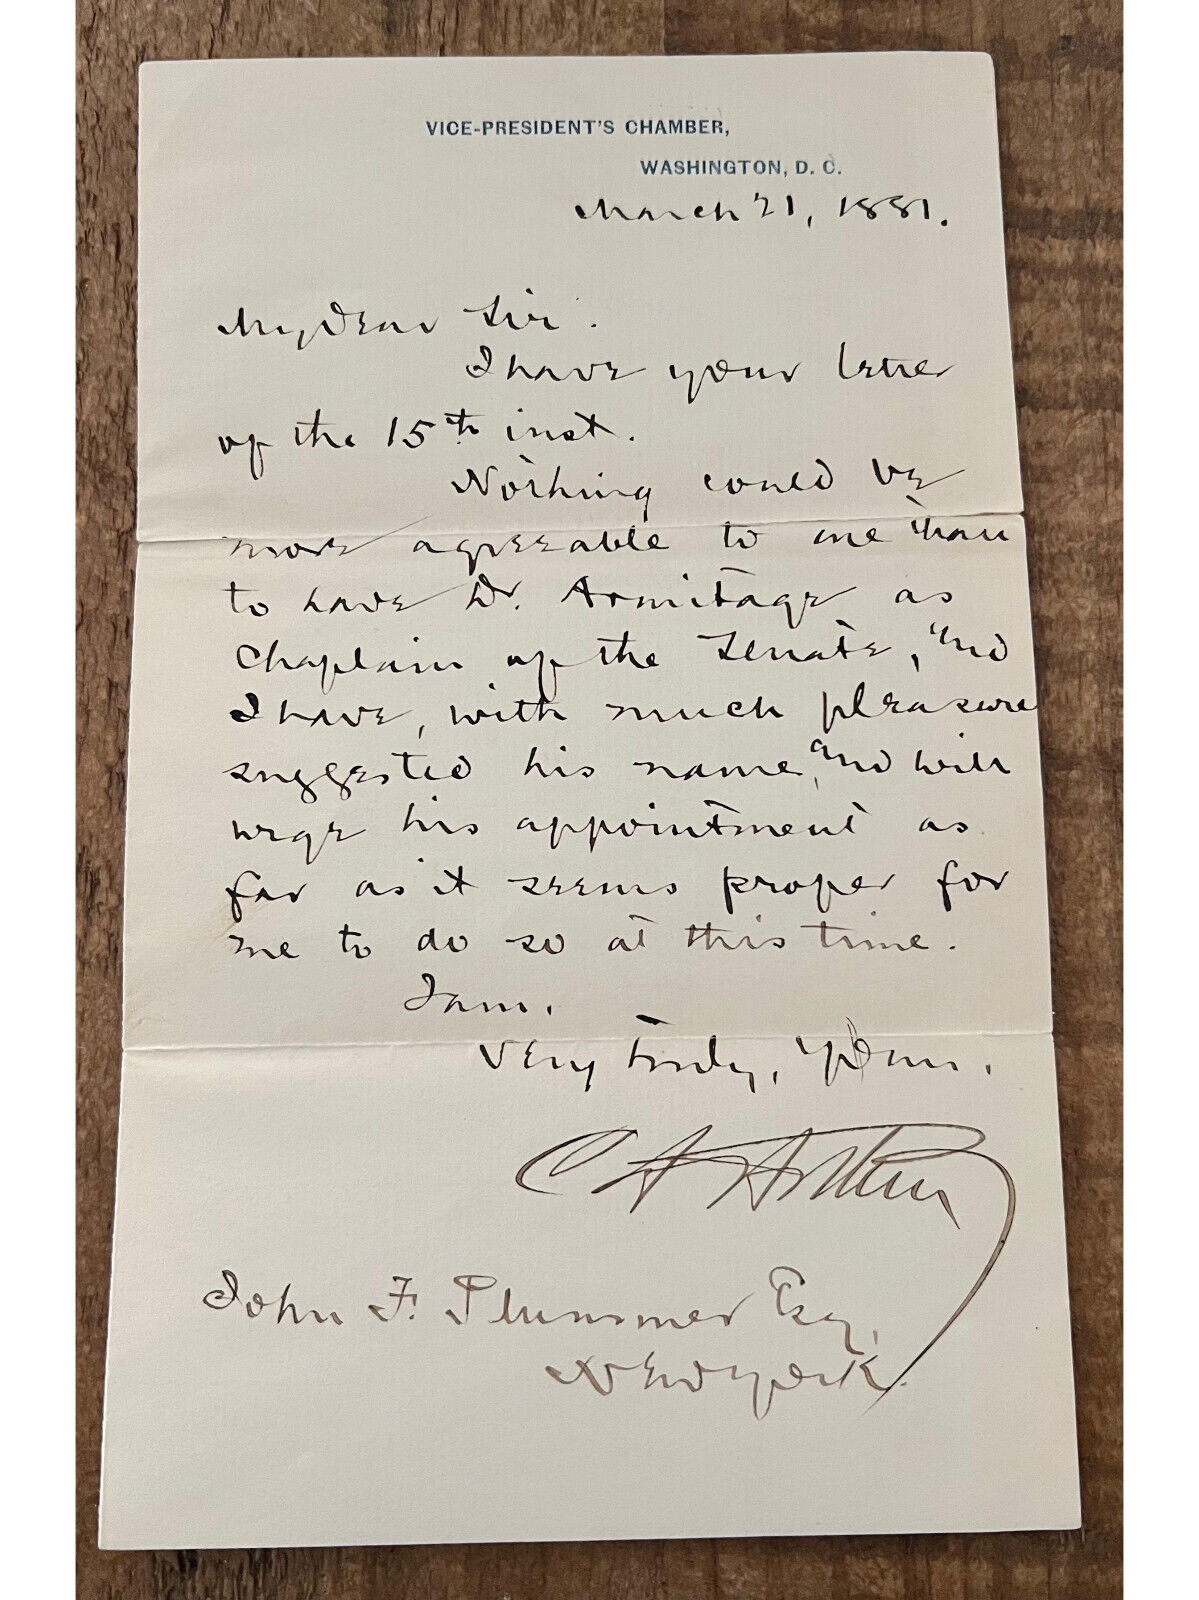 Chester A. Arthur 1881 Letter Signed as Vice President - Two Week Into His Term